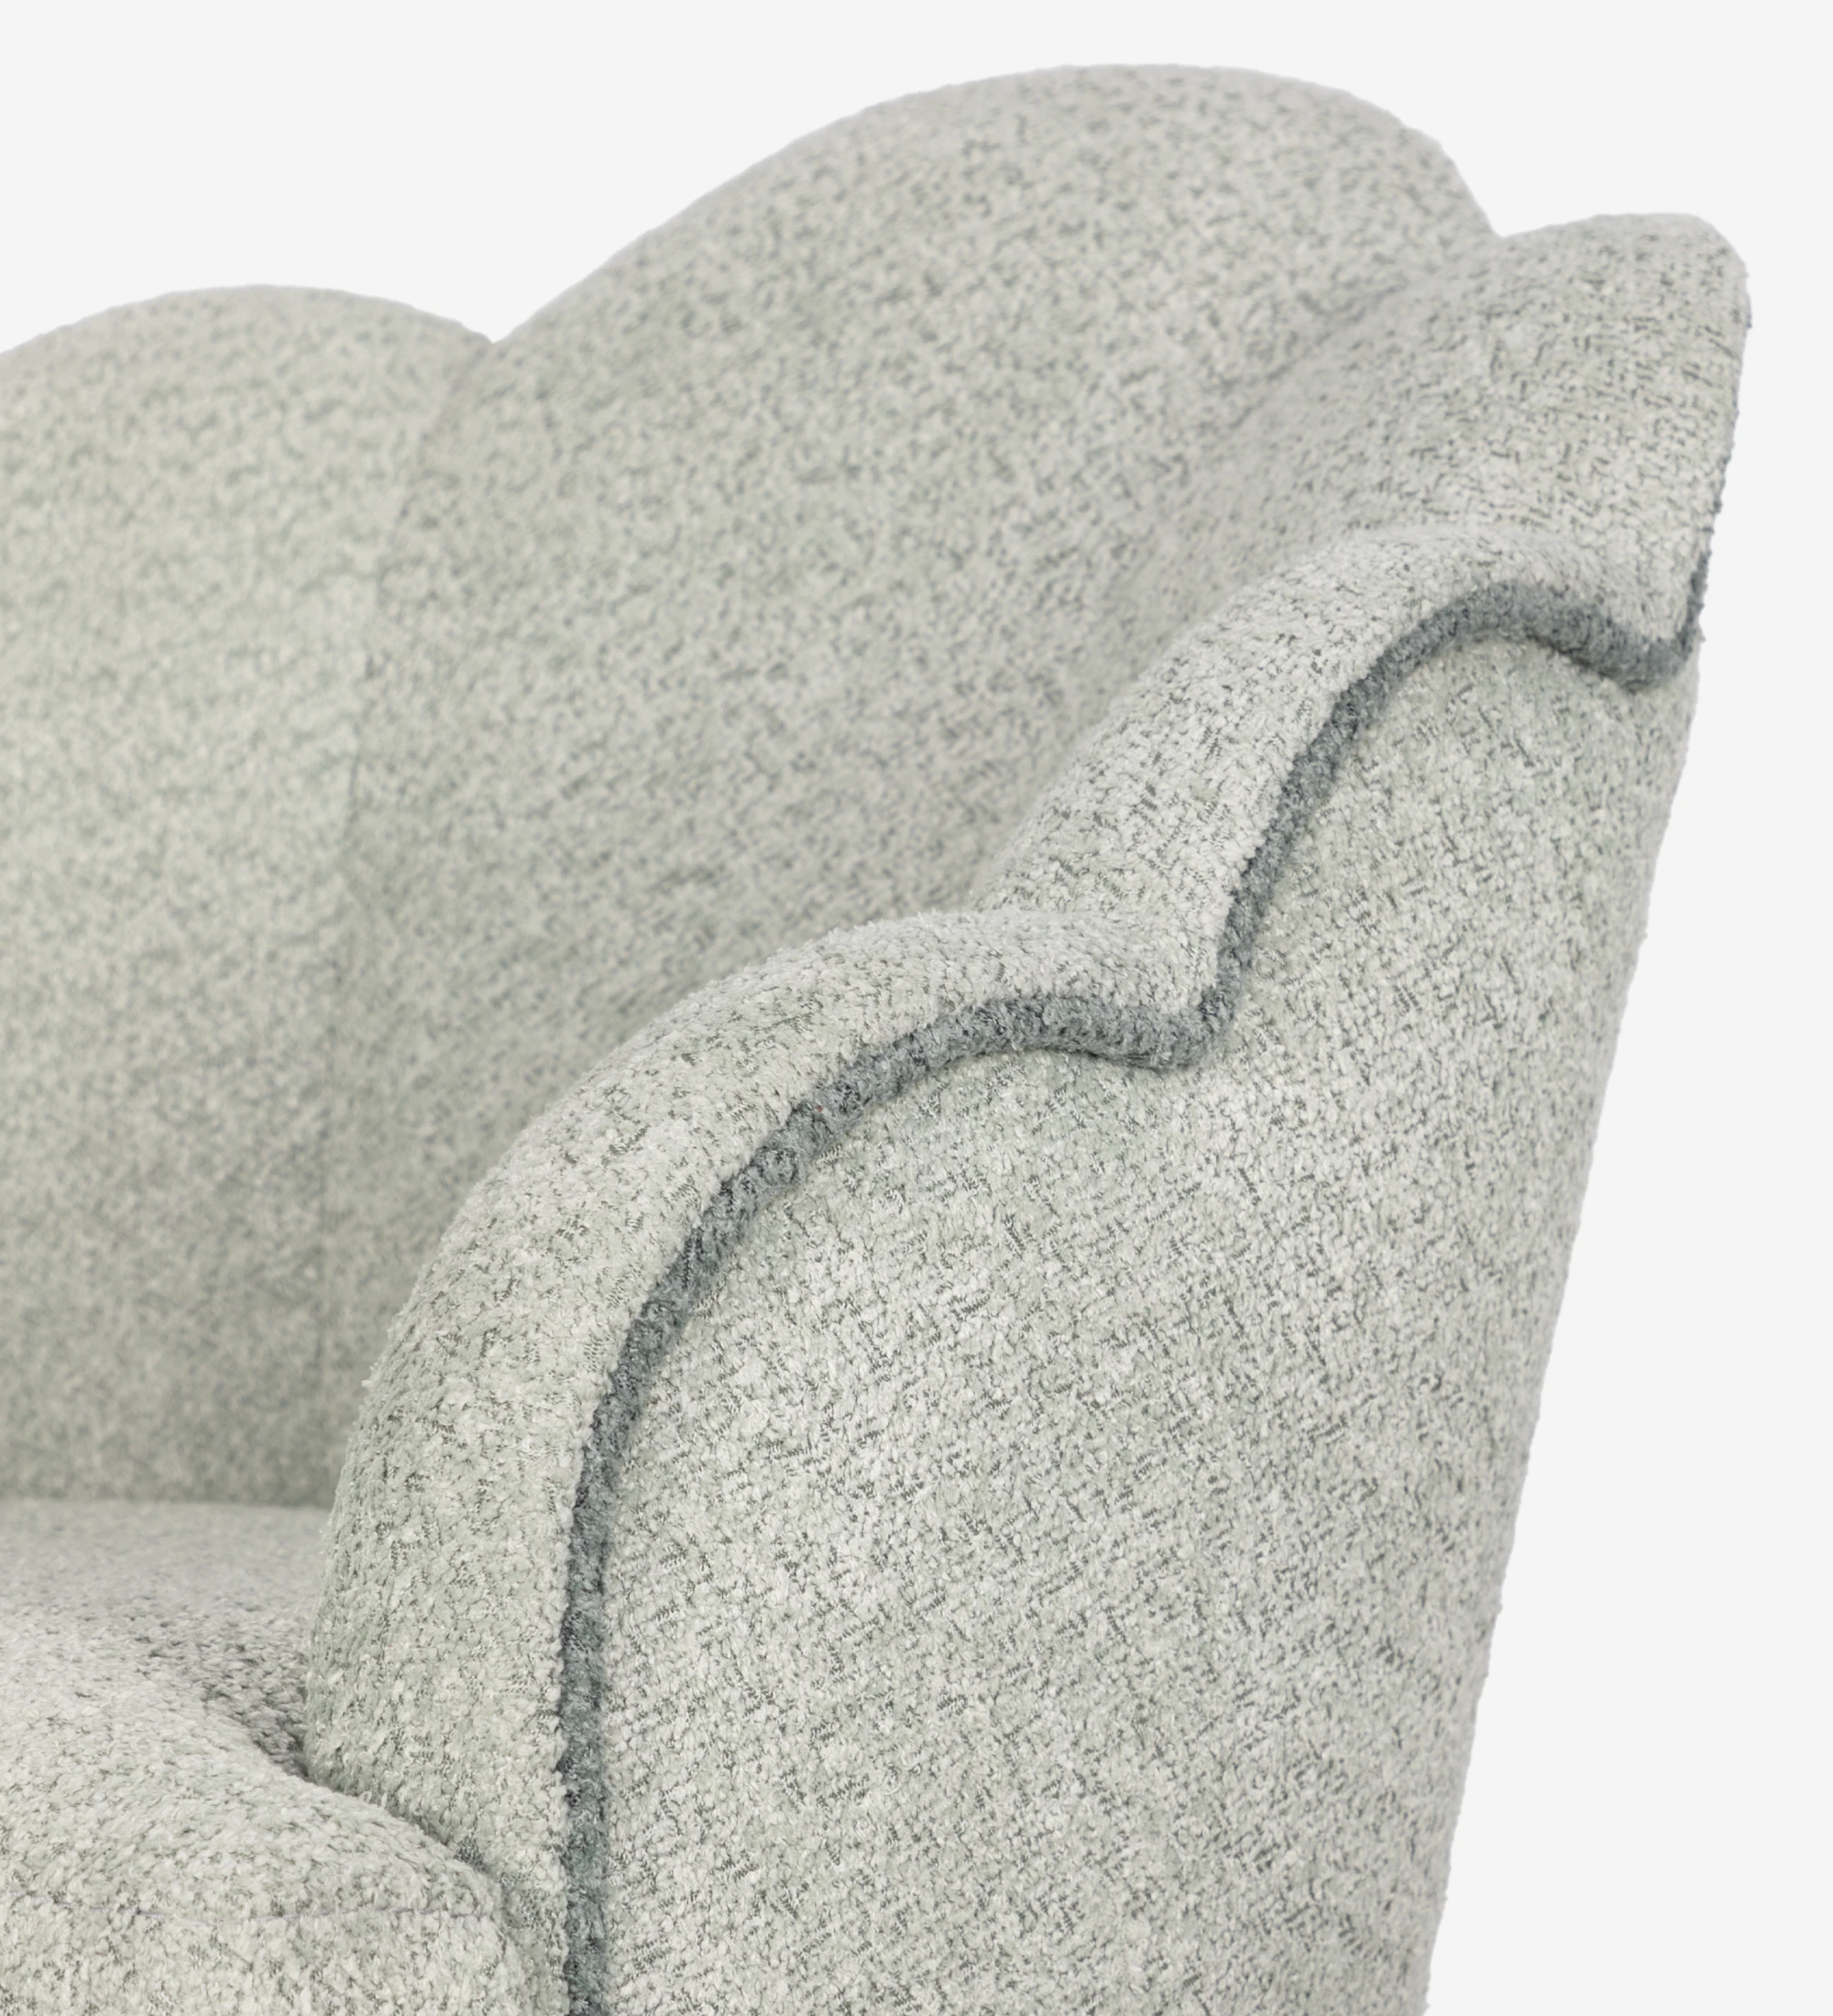 Lisboa armchair upholstered in water green fabric, pearl lacquered feet.